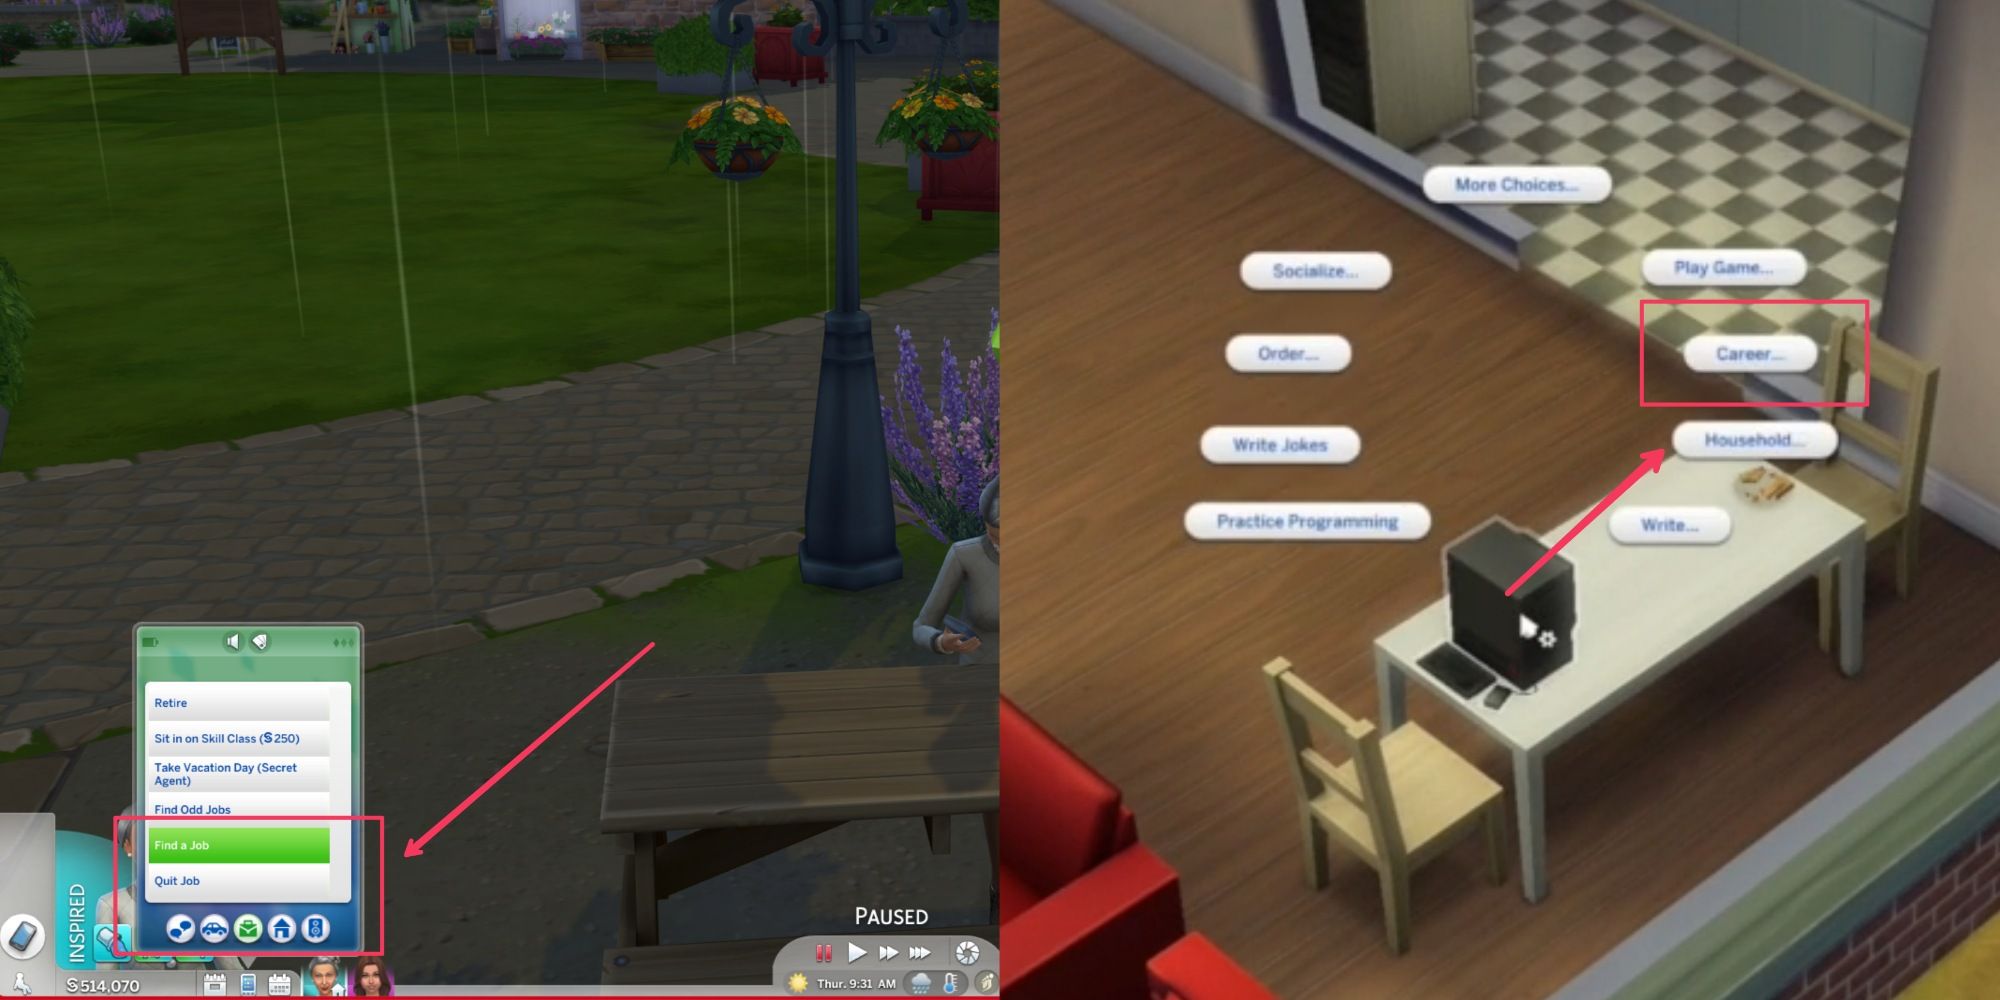 find a job option in the phone and career option in the computer in the sims 4